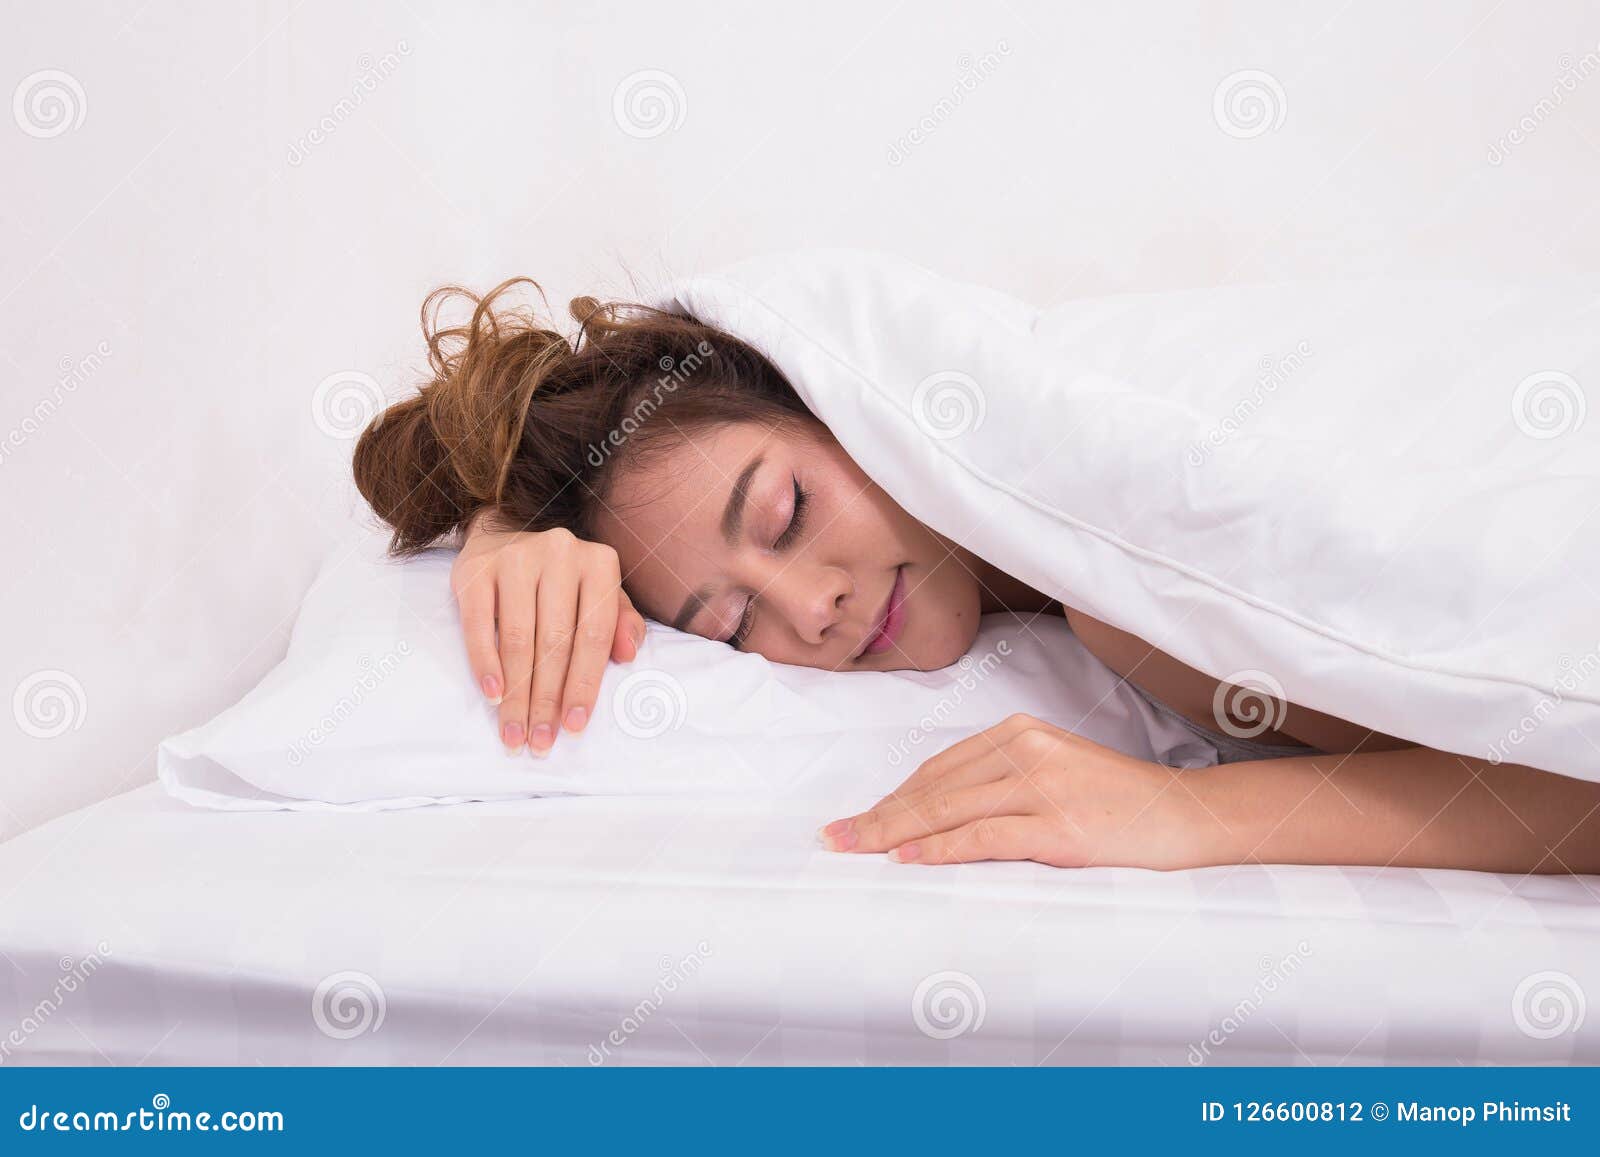 Woman Sleeping In Sexy Underwear In Bed Stock Photo, Picture and Royalty  Free Image. Image 62626115.